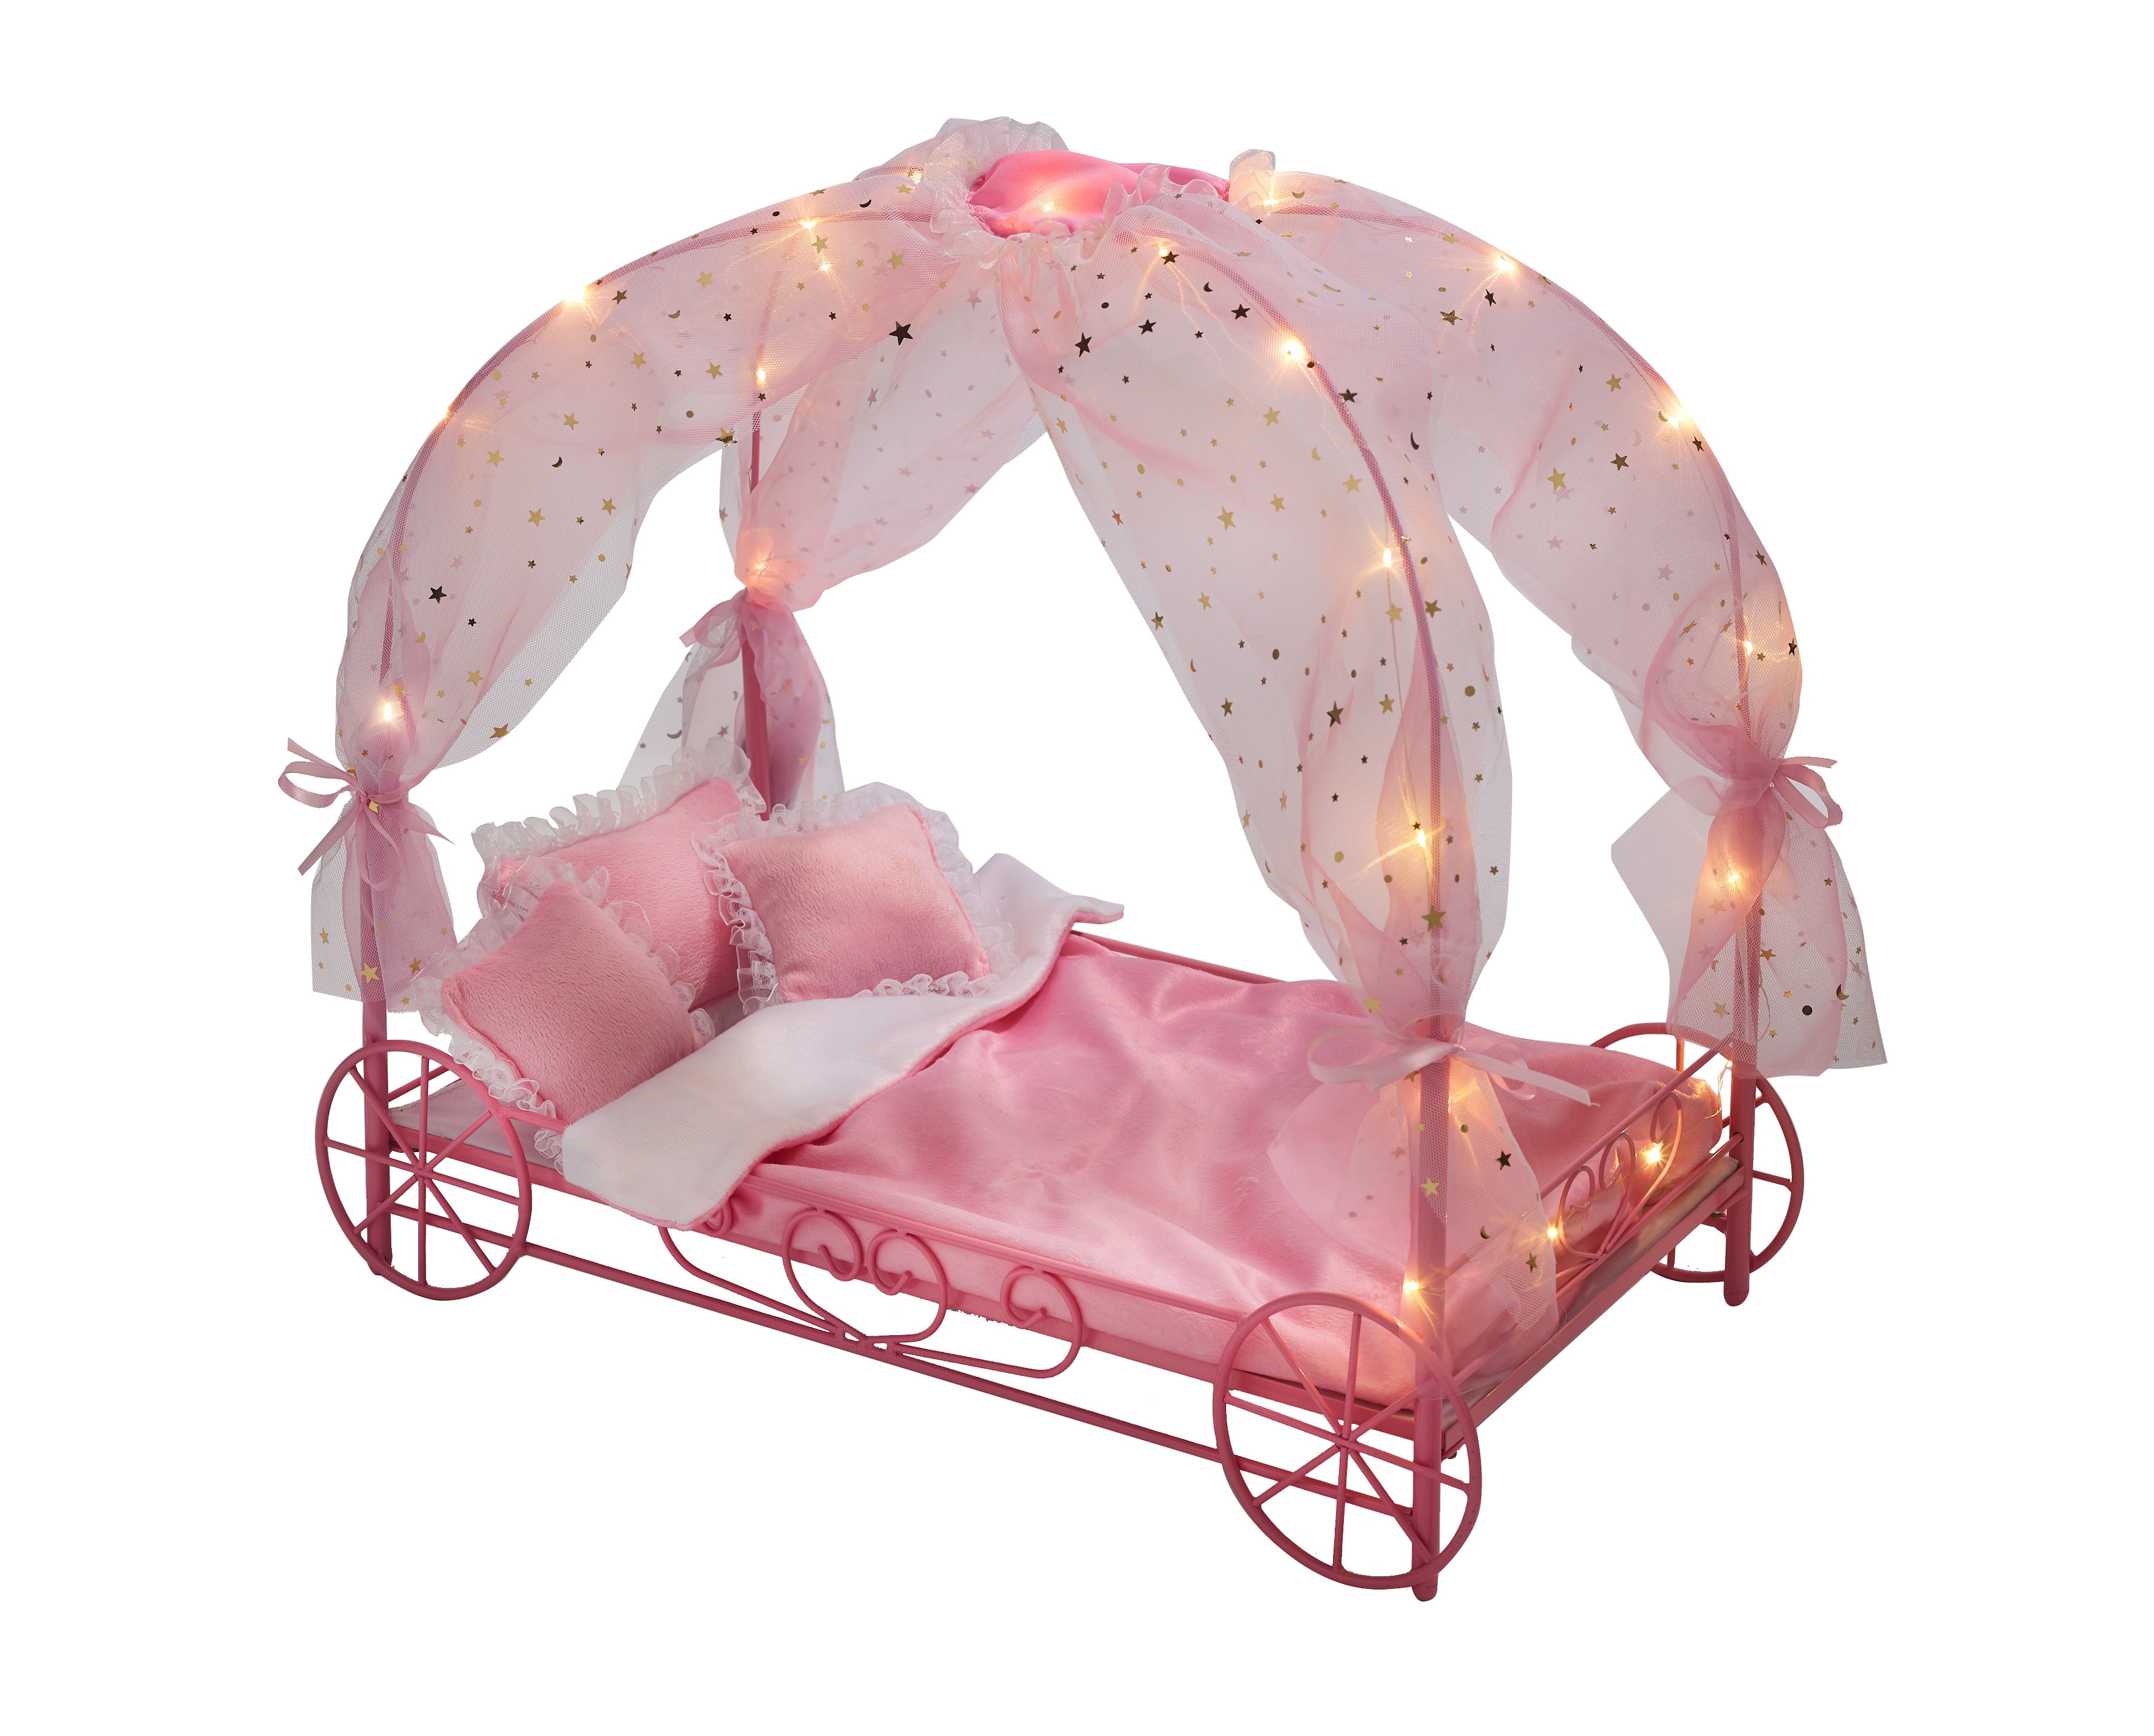 Badger Basket Royal Carriage Metal Doll Bed with Canopy, Bedding and LED Lights - Pink/White/Stars - Fits American Girl, My Life As & Most 18' Dolls